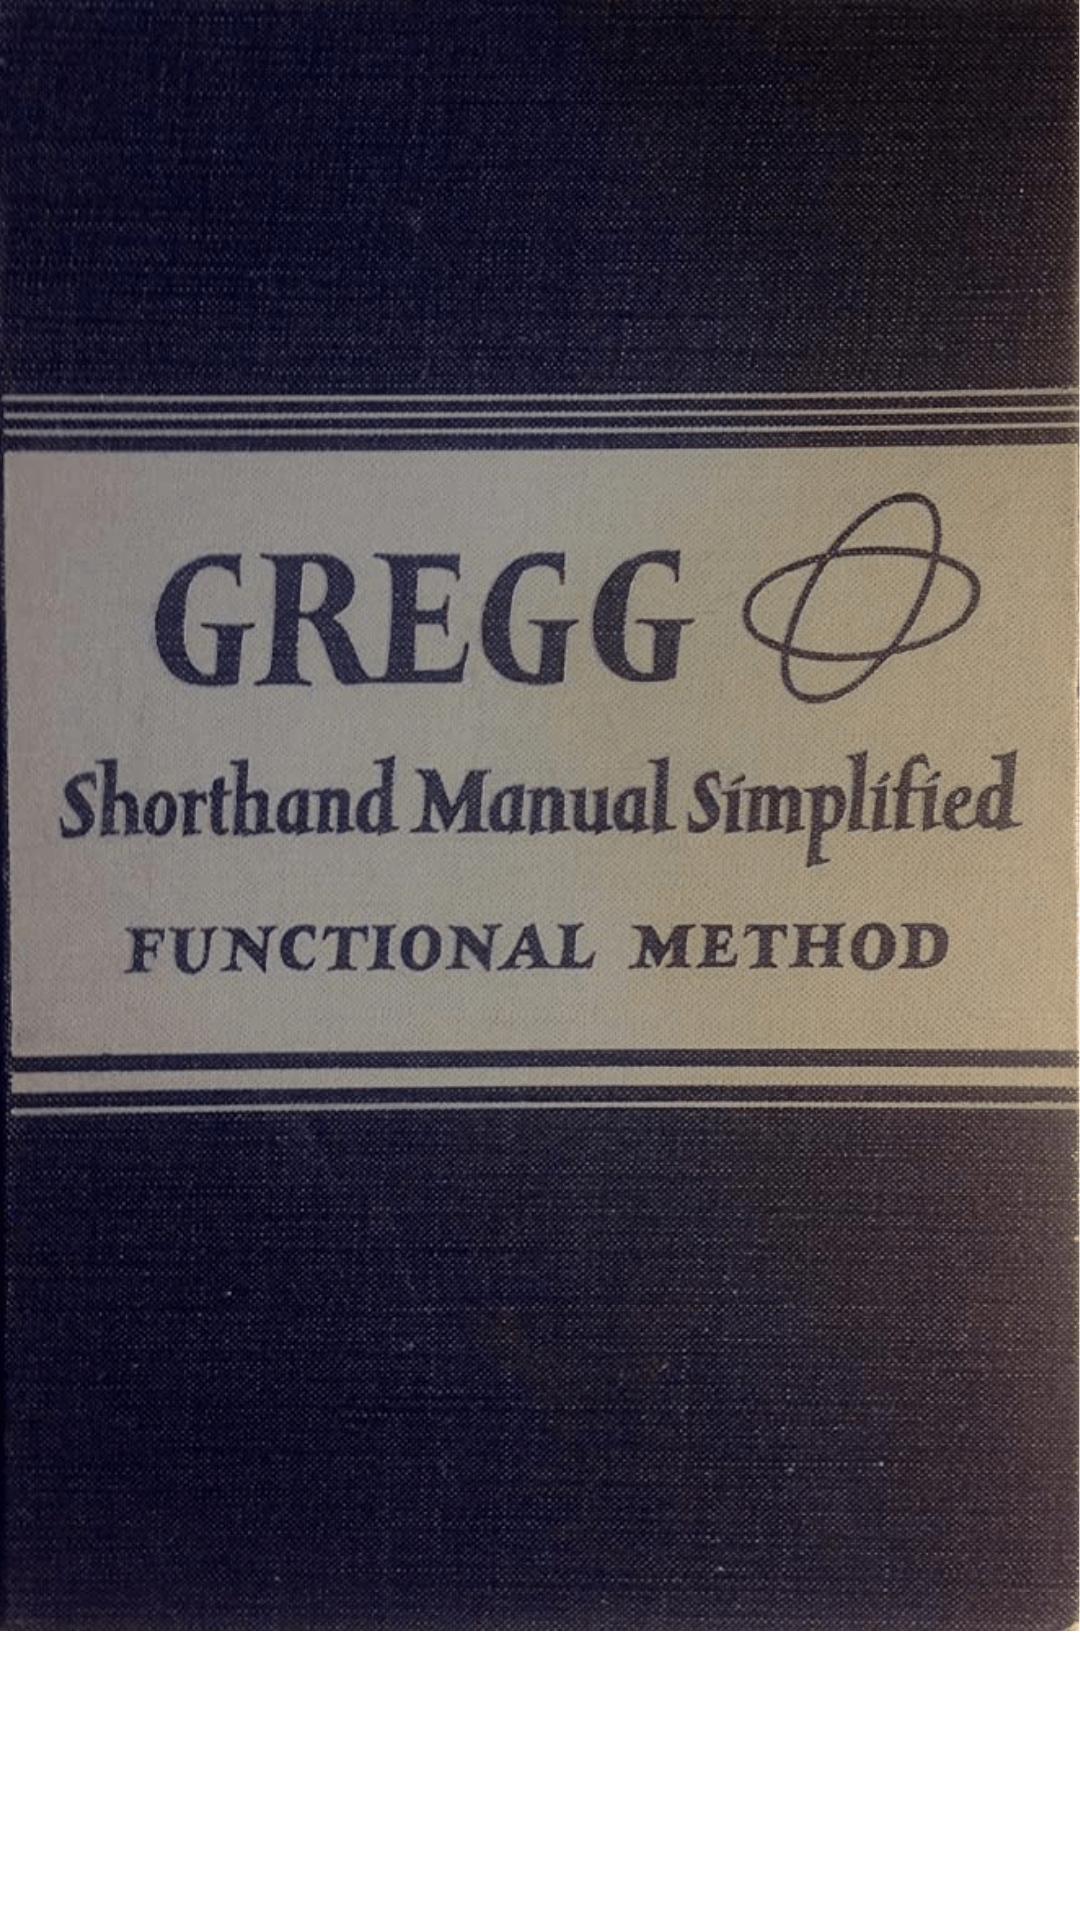 The Gregg Shorthand Manual Simplified